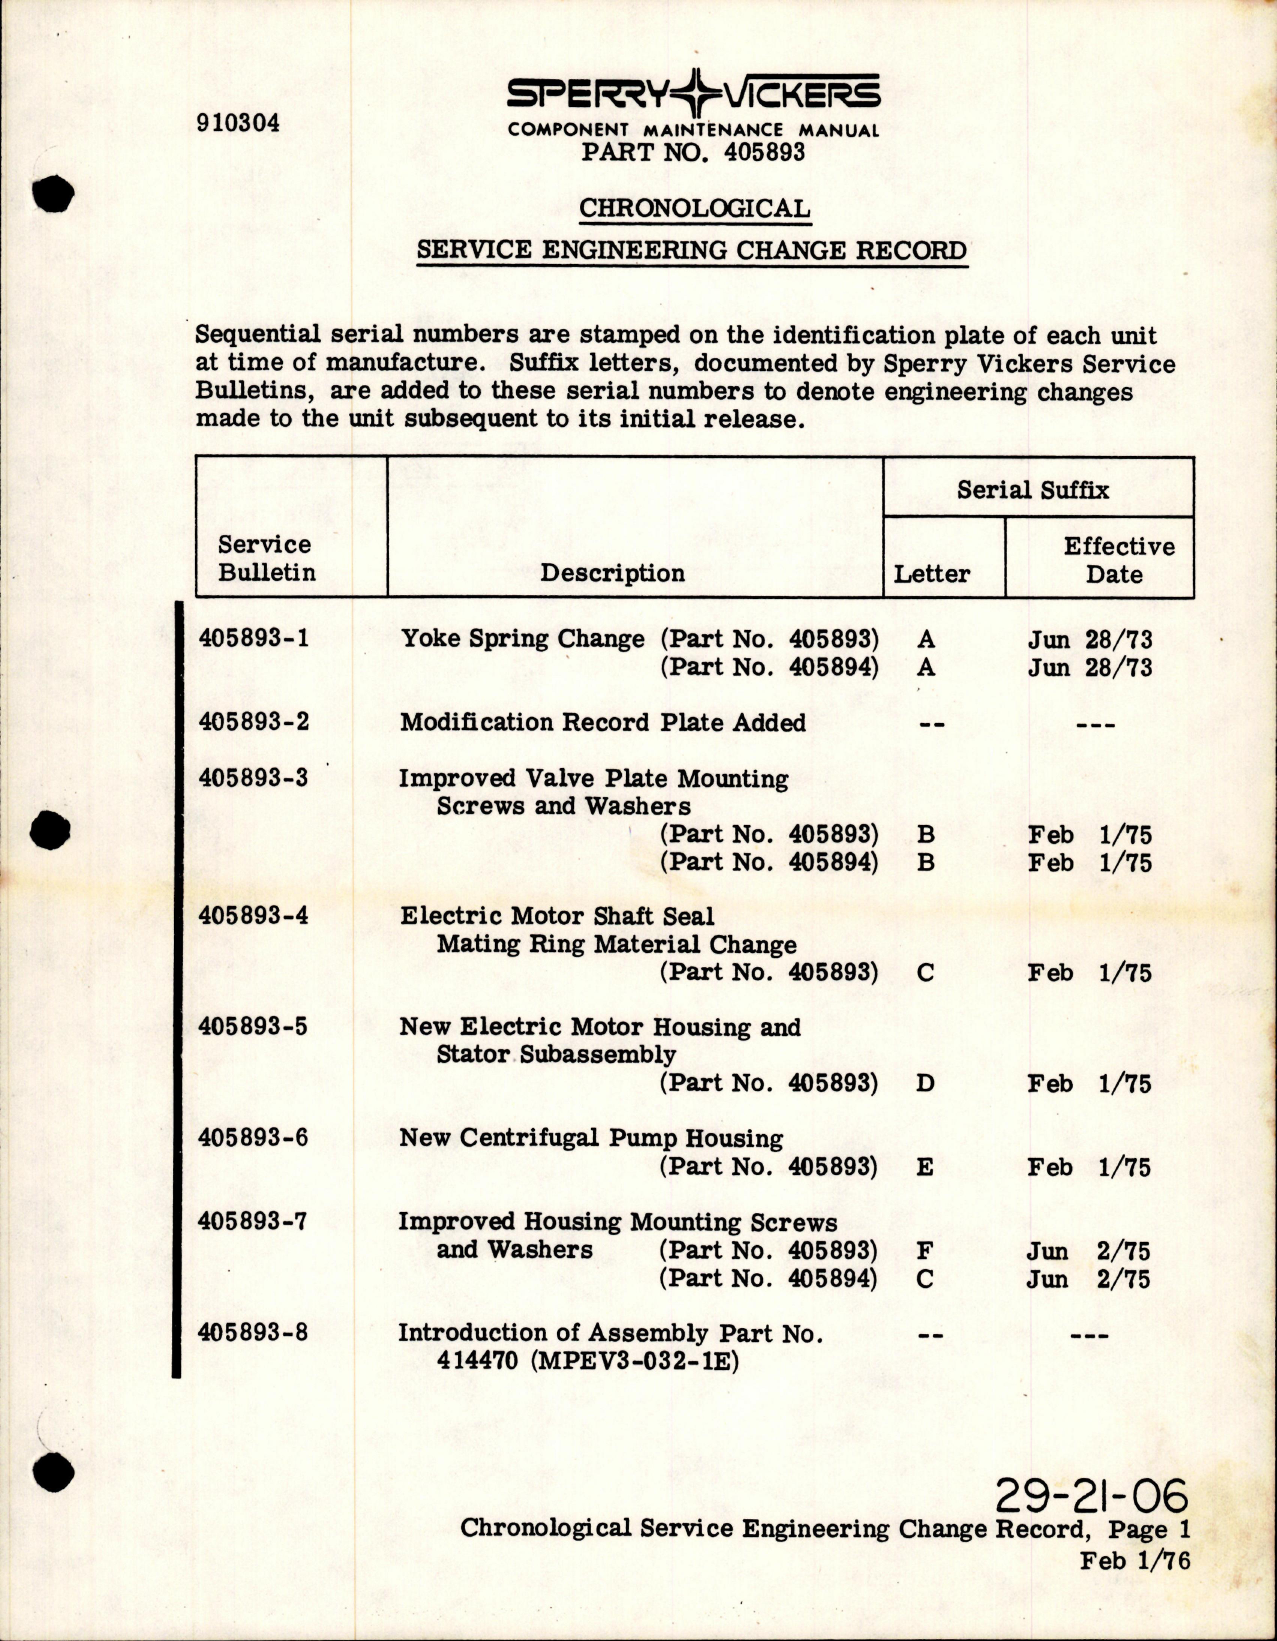 Sample page 1 from AirCorps Library document: Chronological Service Engineering Change Record - Component Maintenance Manuals for Hydraulic Motorpump - Part 405893